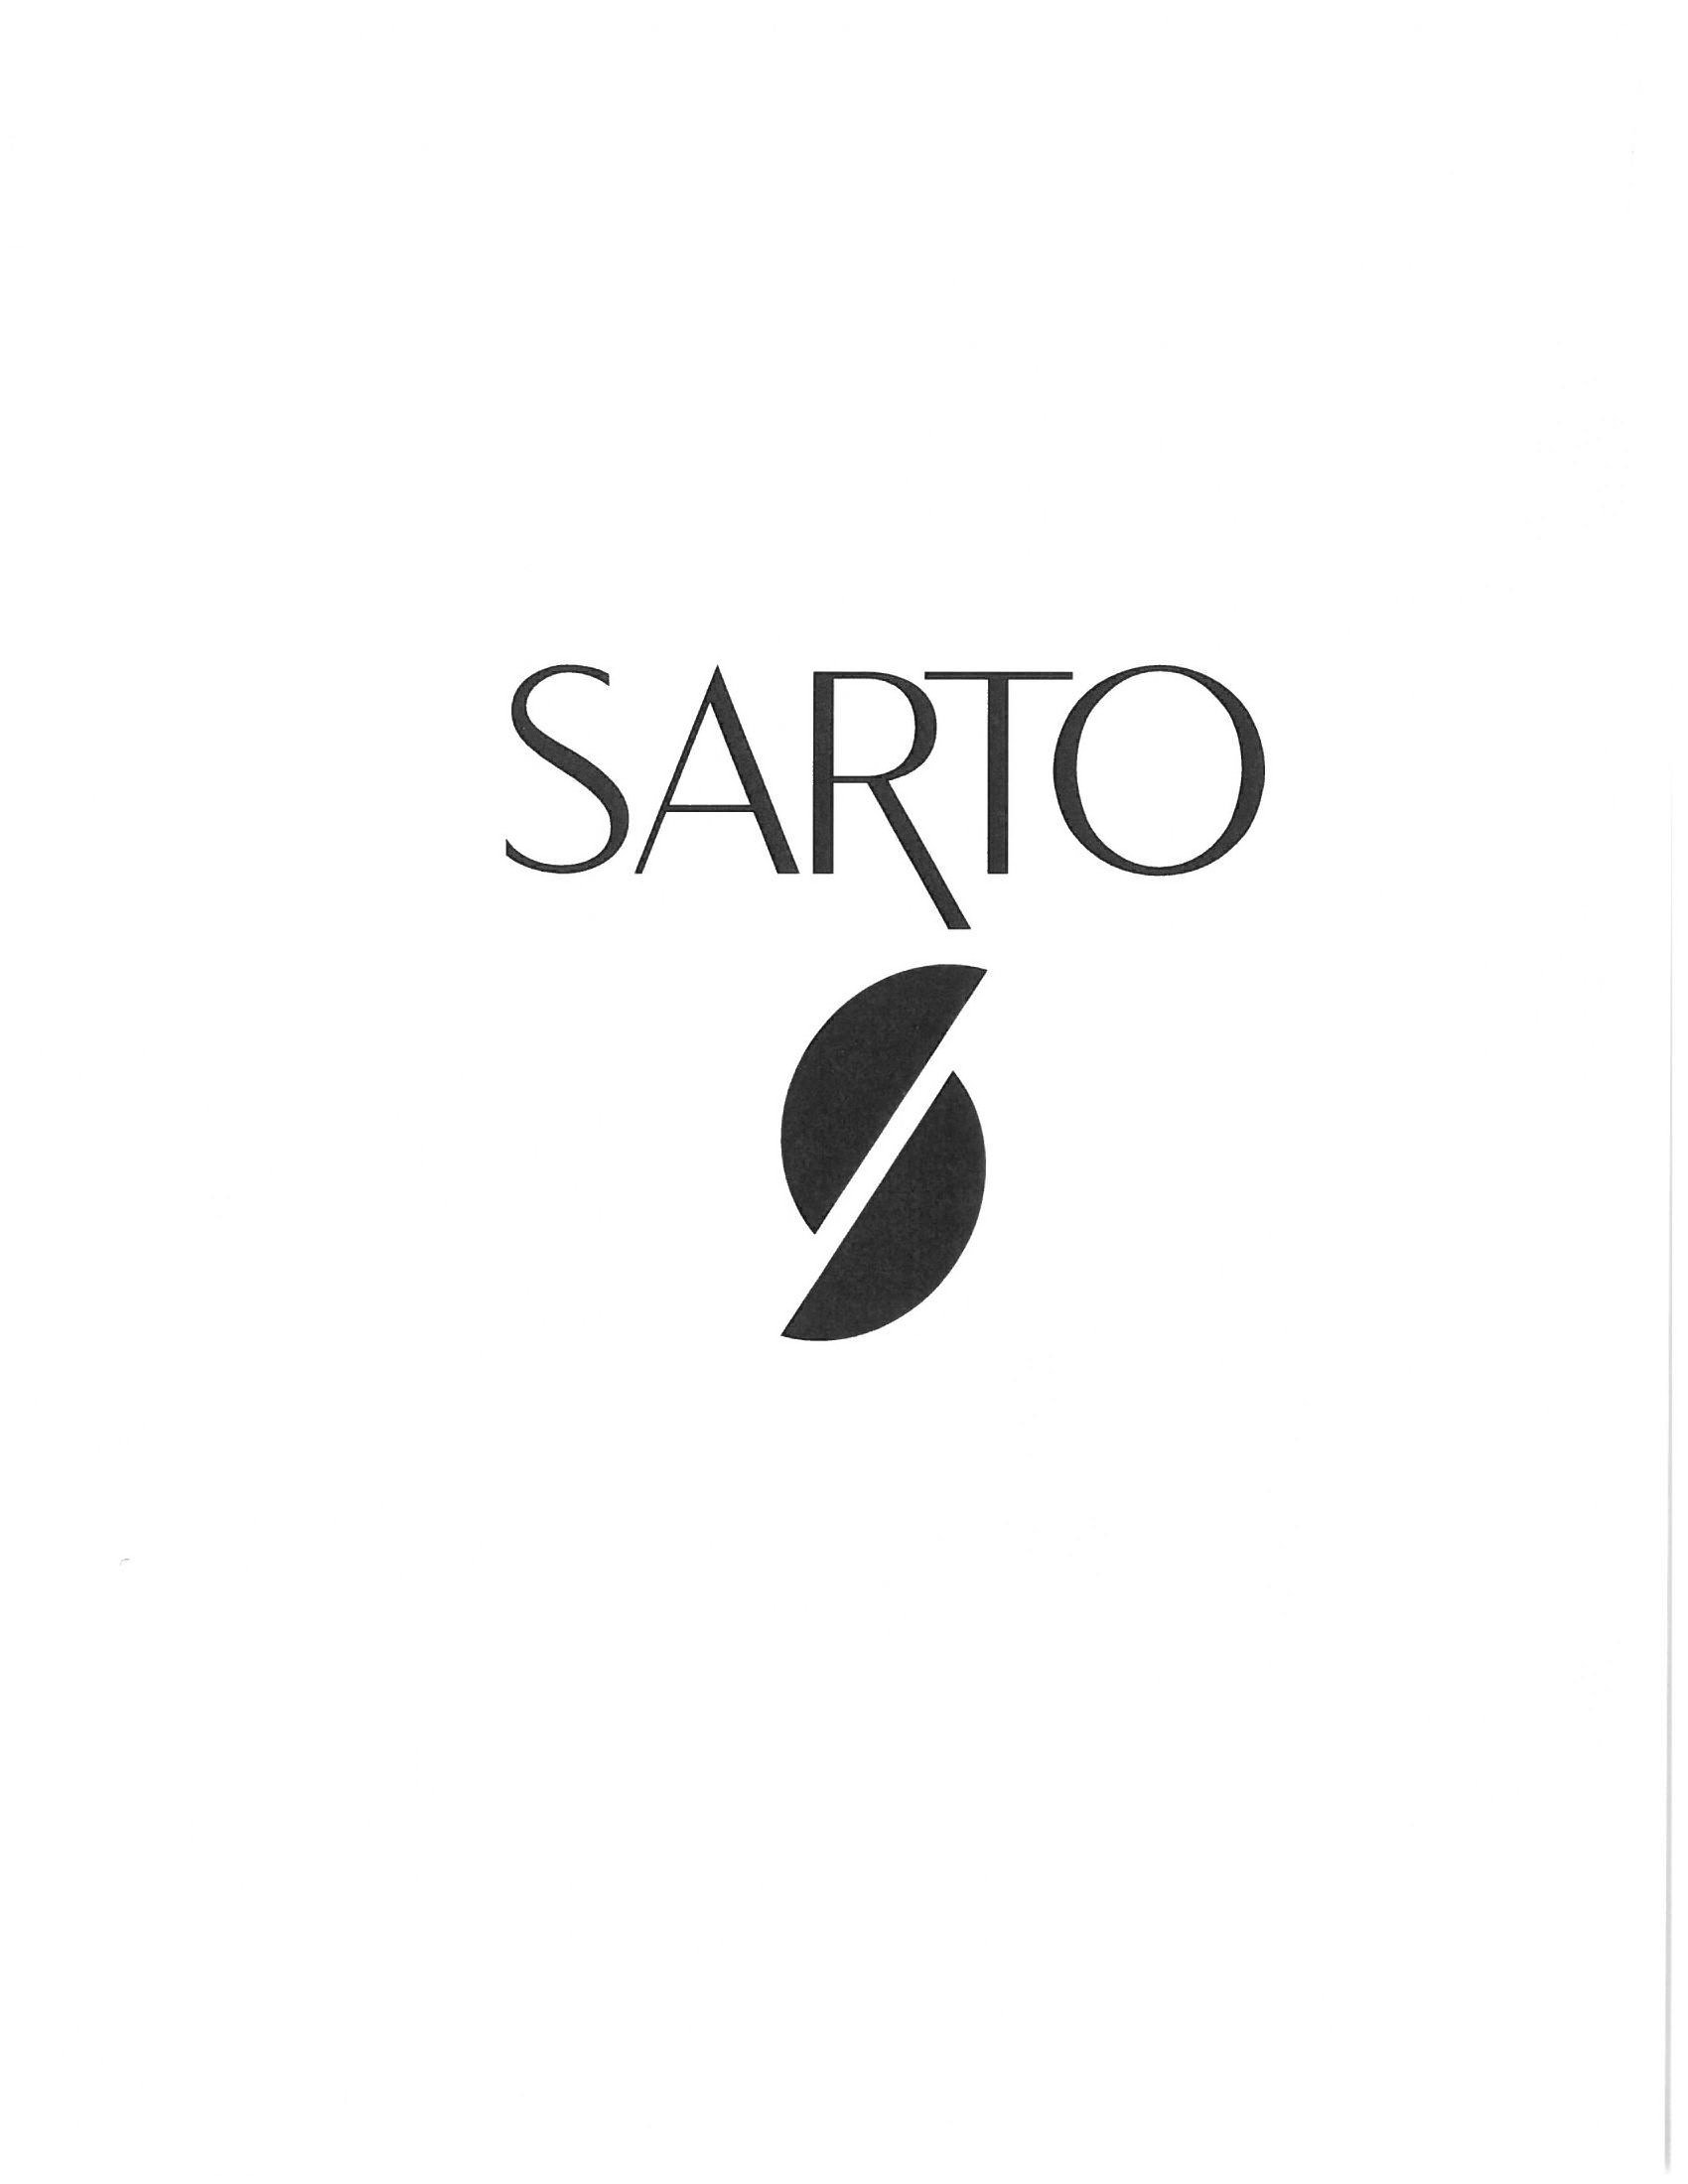  SARTO AND A SLANTED CIRCLE THAT HAS BEEN SPLIT DOWN THE MIDDLE